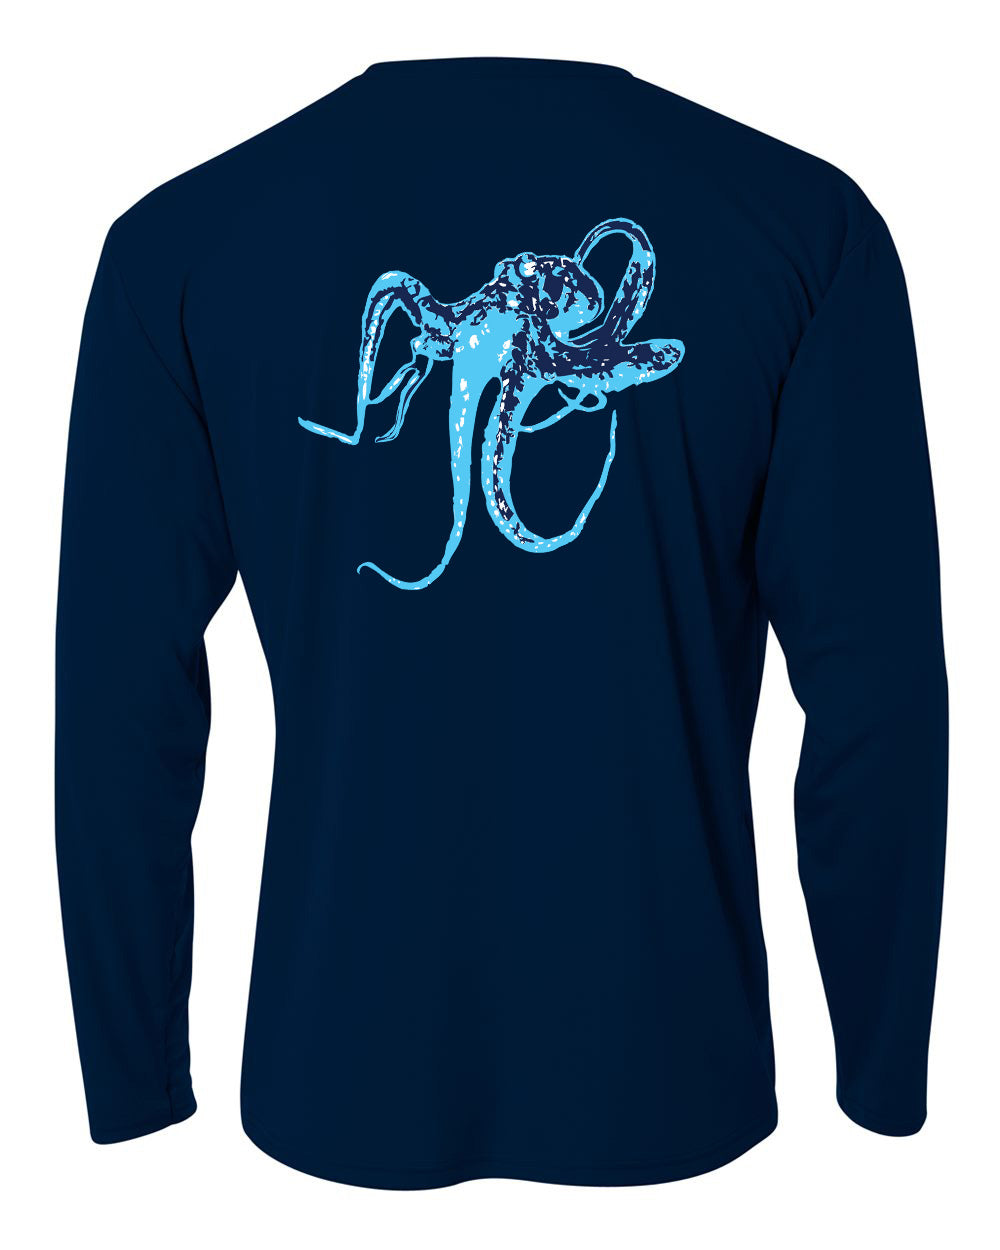 Youth Performance Fishing Shirts 50+uv Sun Protection -Reel Fishy Apparel M / Navy Octopus L/S